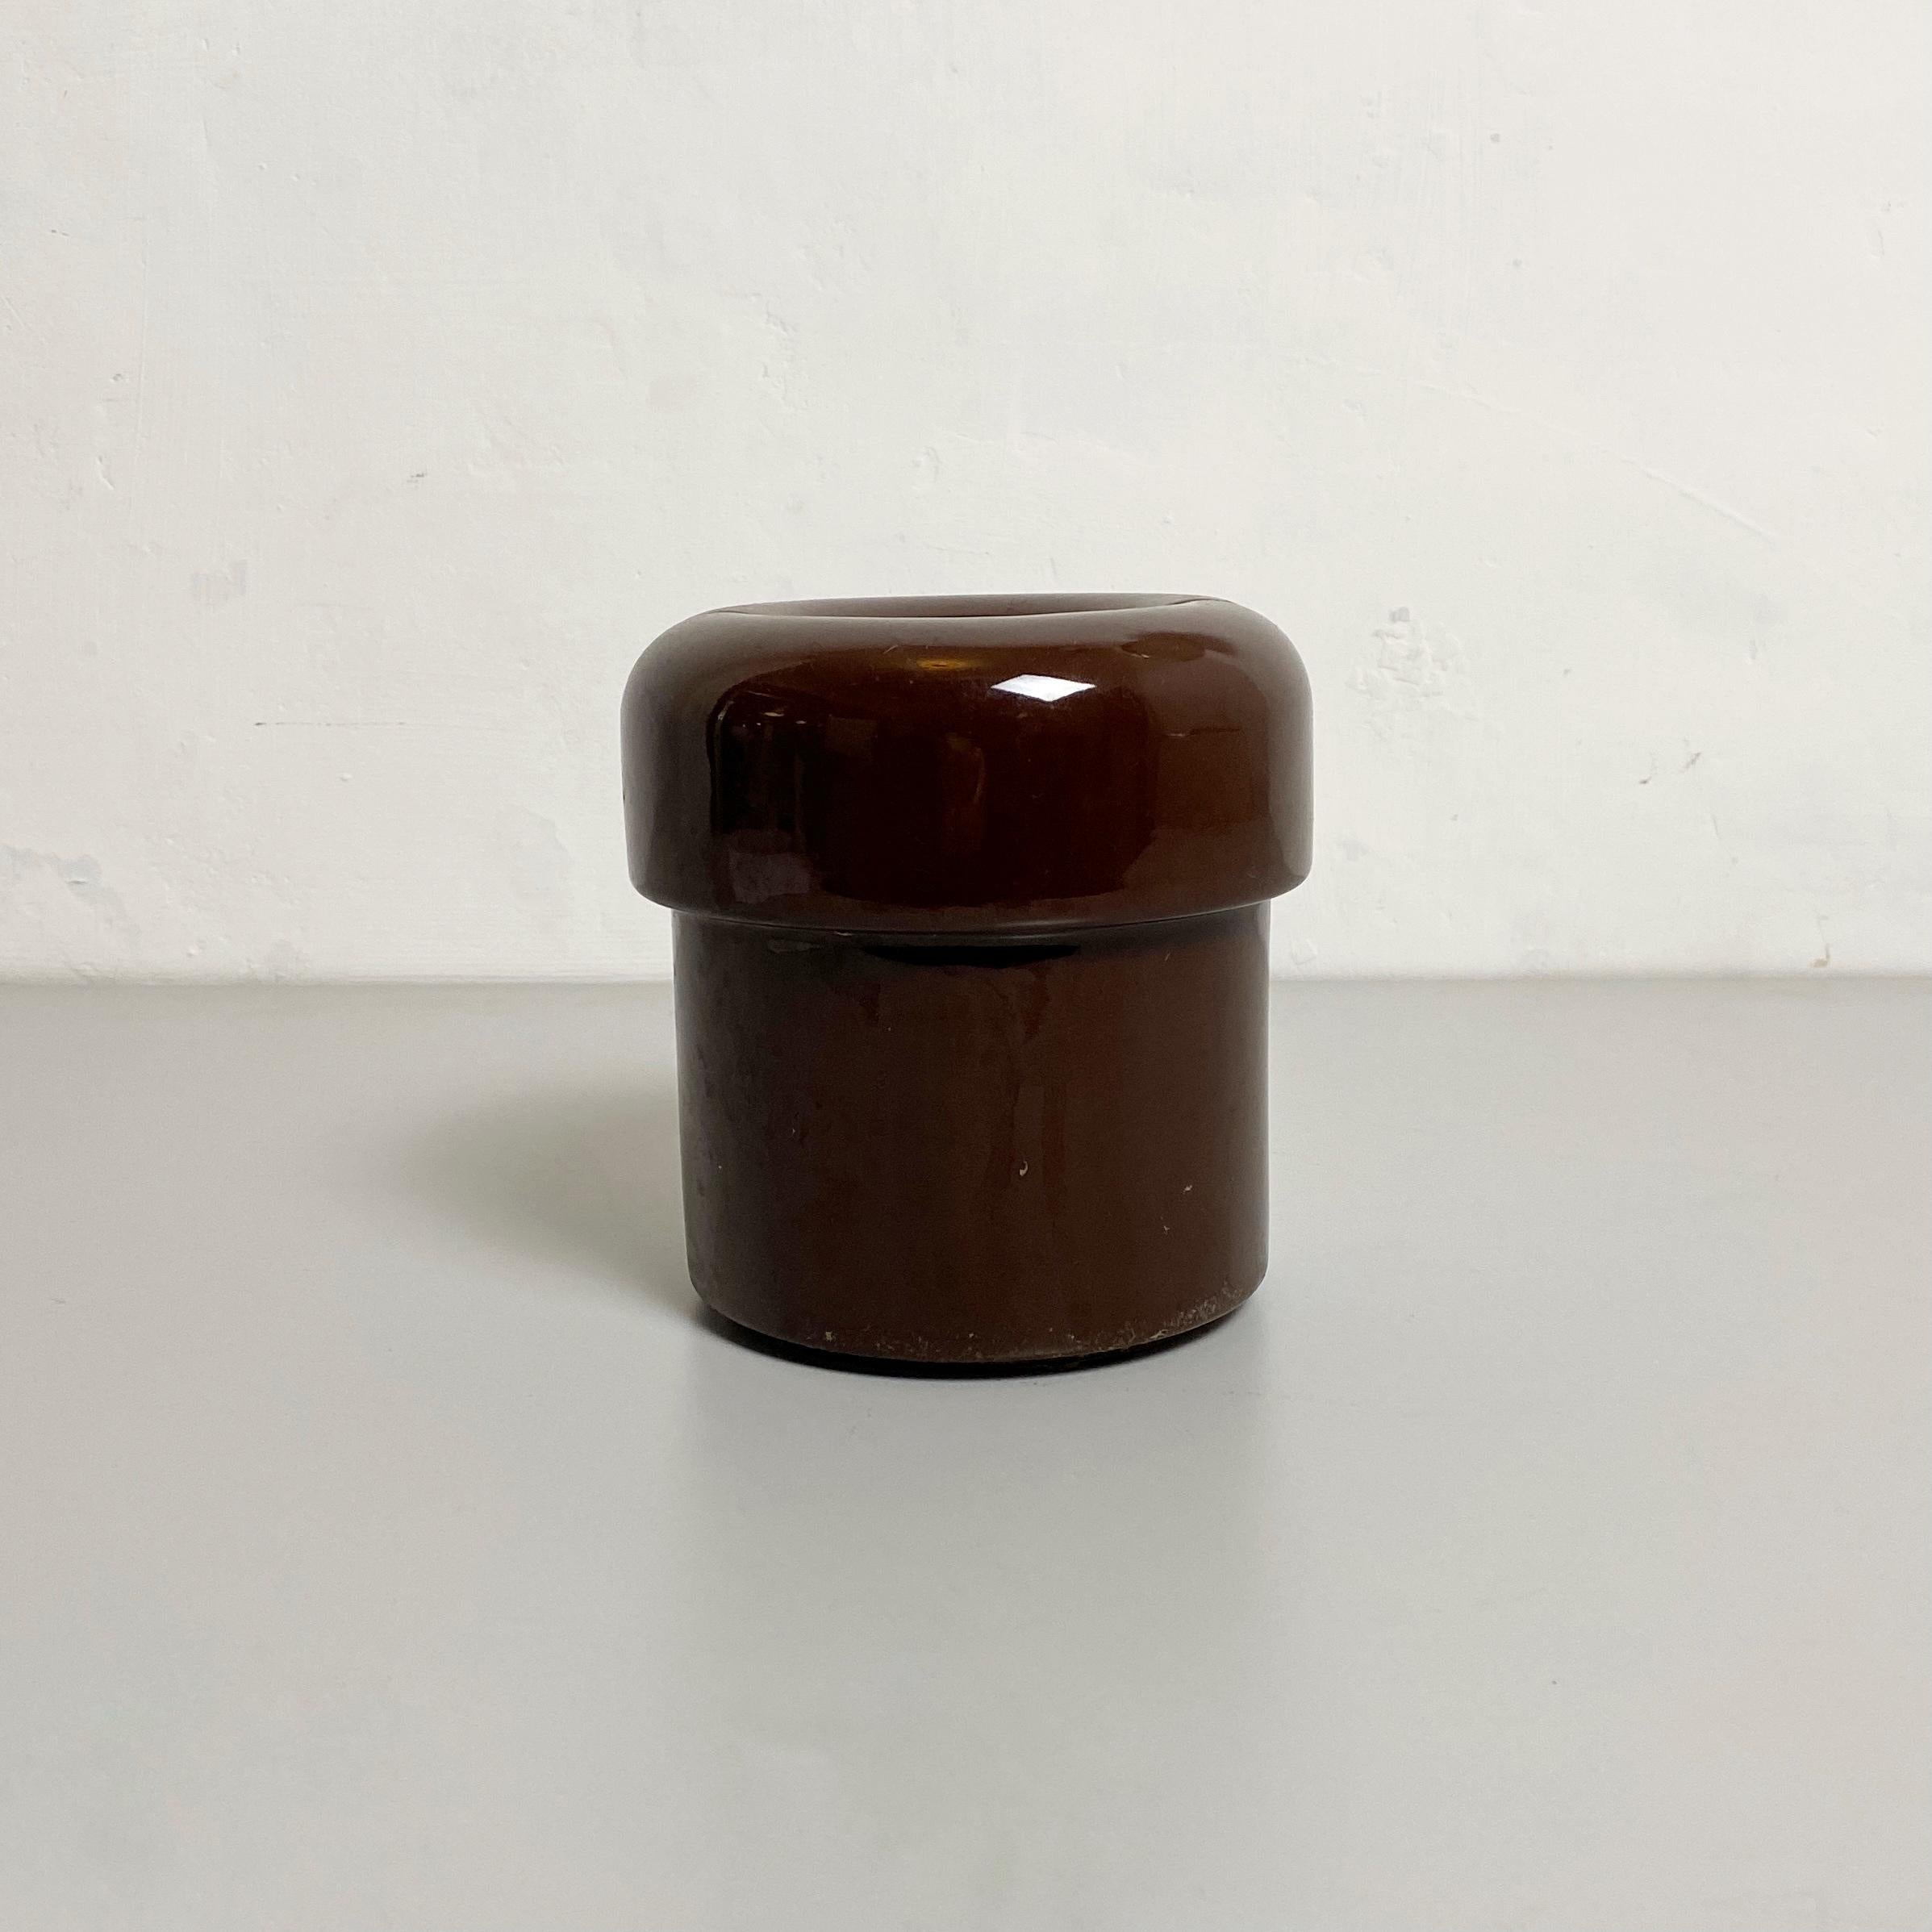 Italian Mid-Century Modern Brown Ceramic Vase by Lineareorm, 1960s In Good Condition For Sale In MIlano, IT